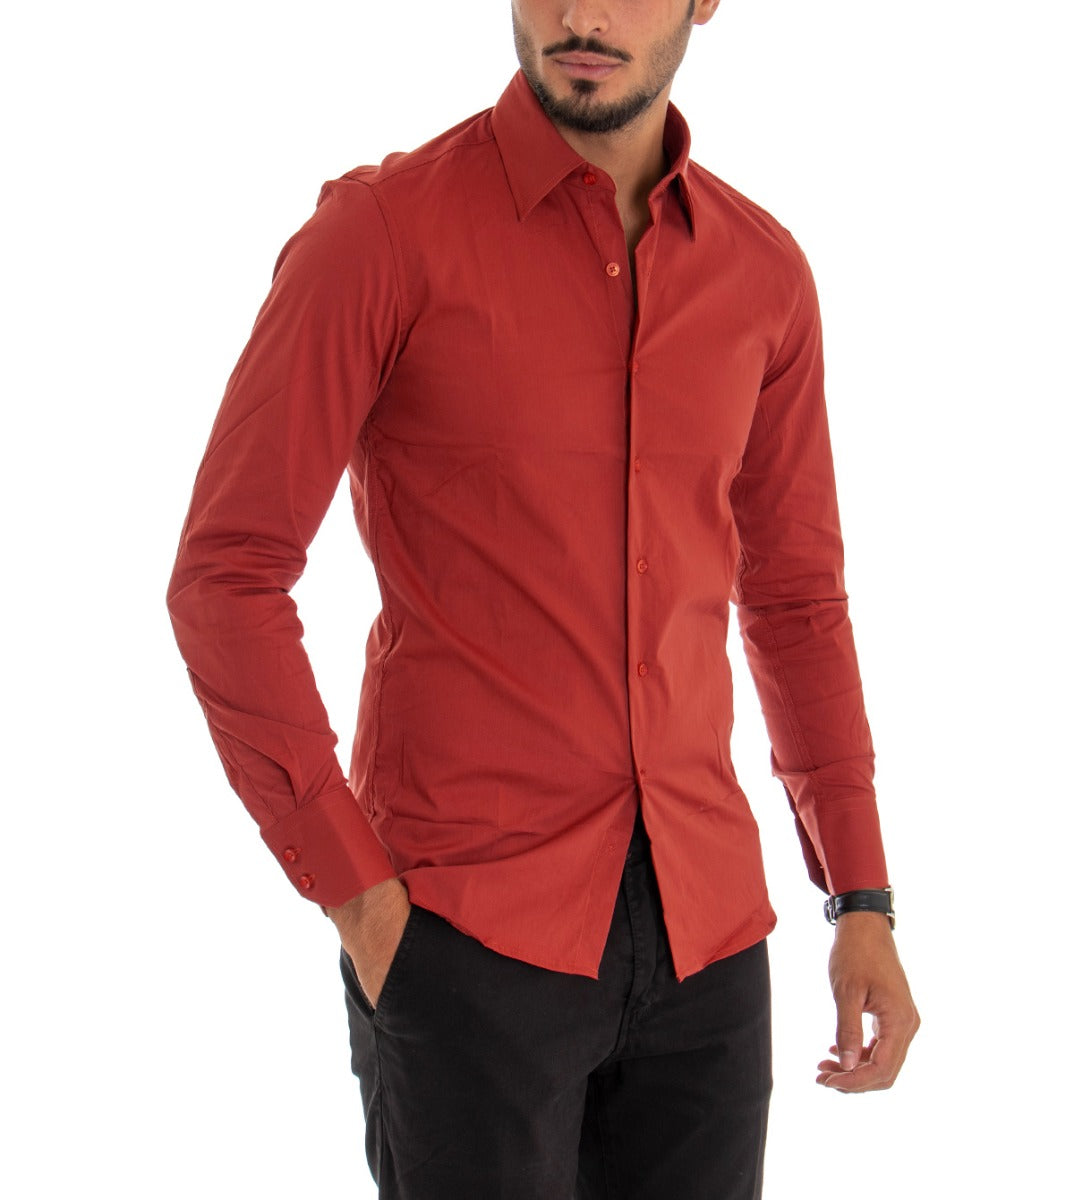 Men's Shirt With Collar Long Sleeve Slim Fit Basic Casual Cotton Red GIOSAL-C2357A